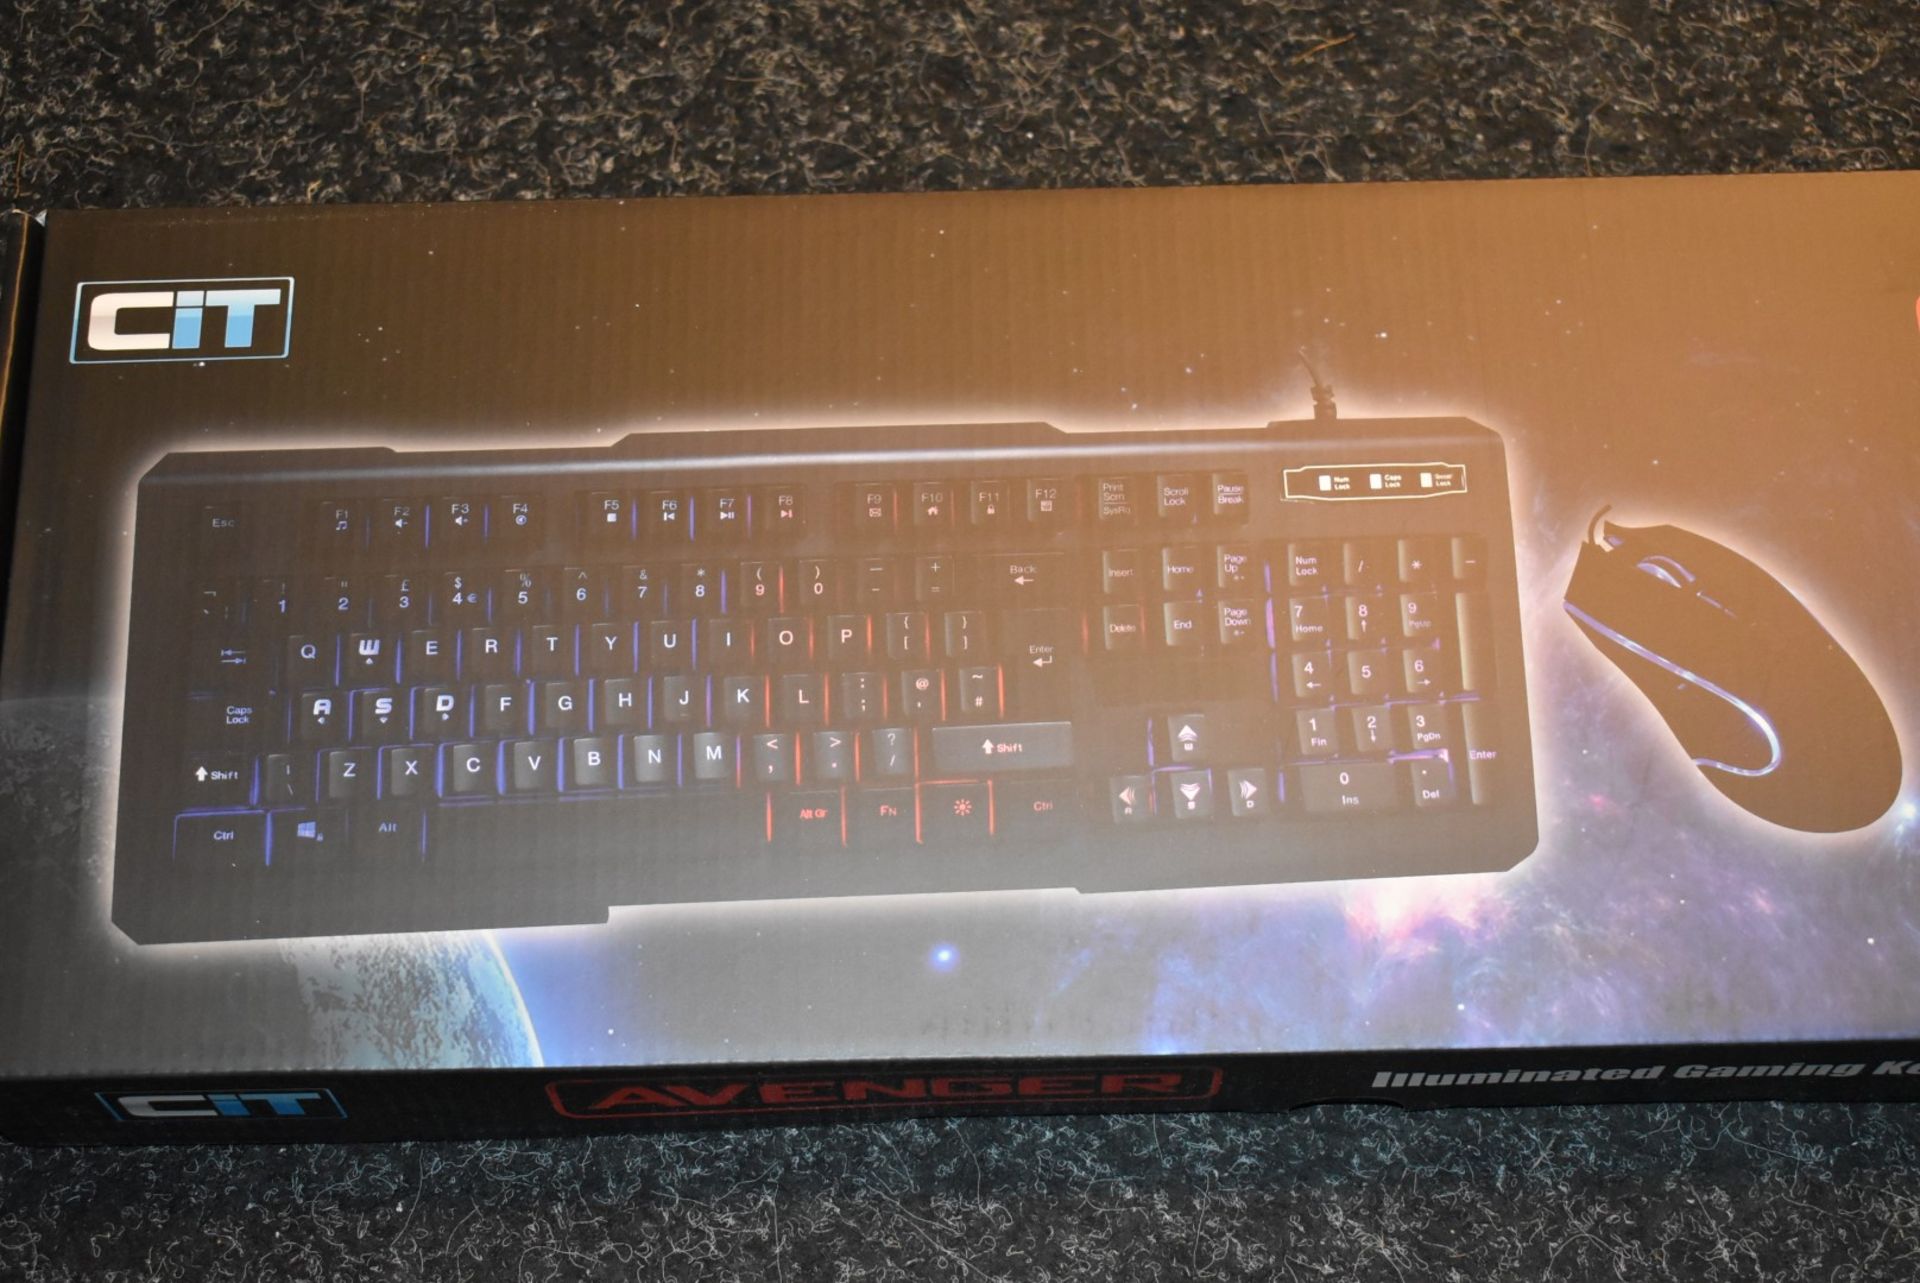 1 x CiT Avenger Gaming Keyboard and Mouse Set - Features 3 Colour Mode LED Backlight - Image 2 of 4